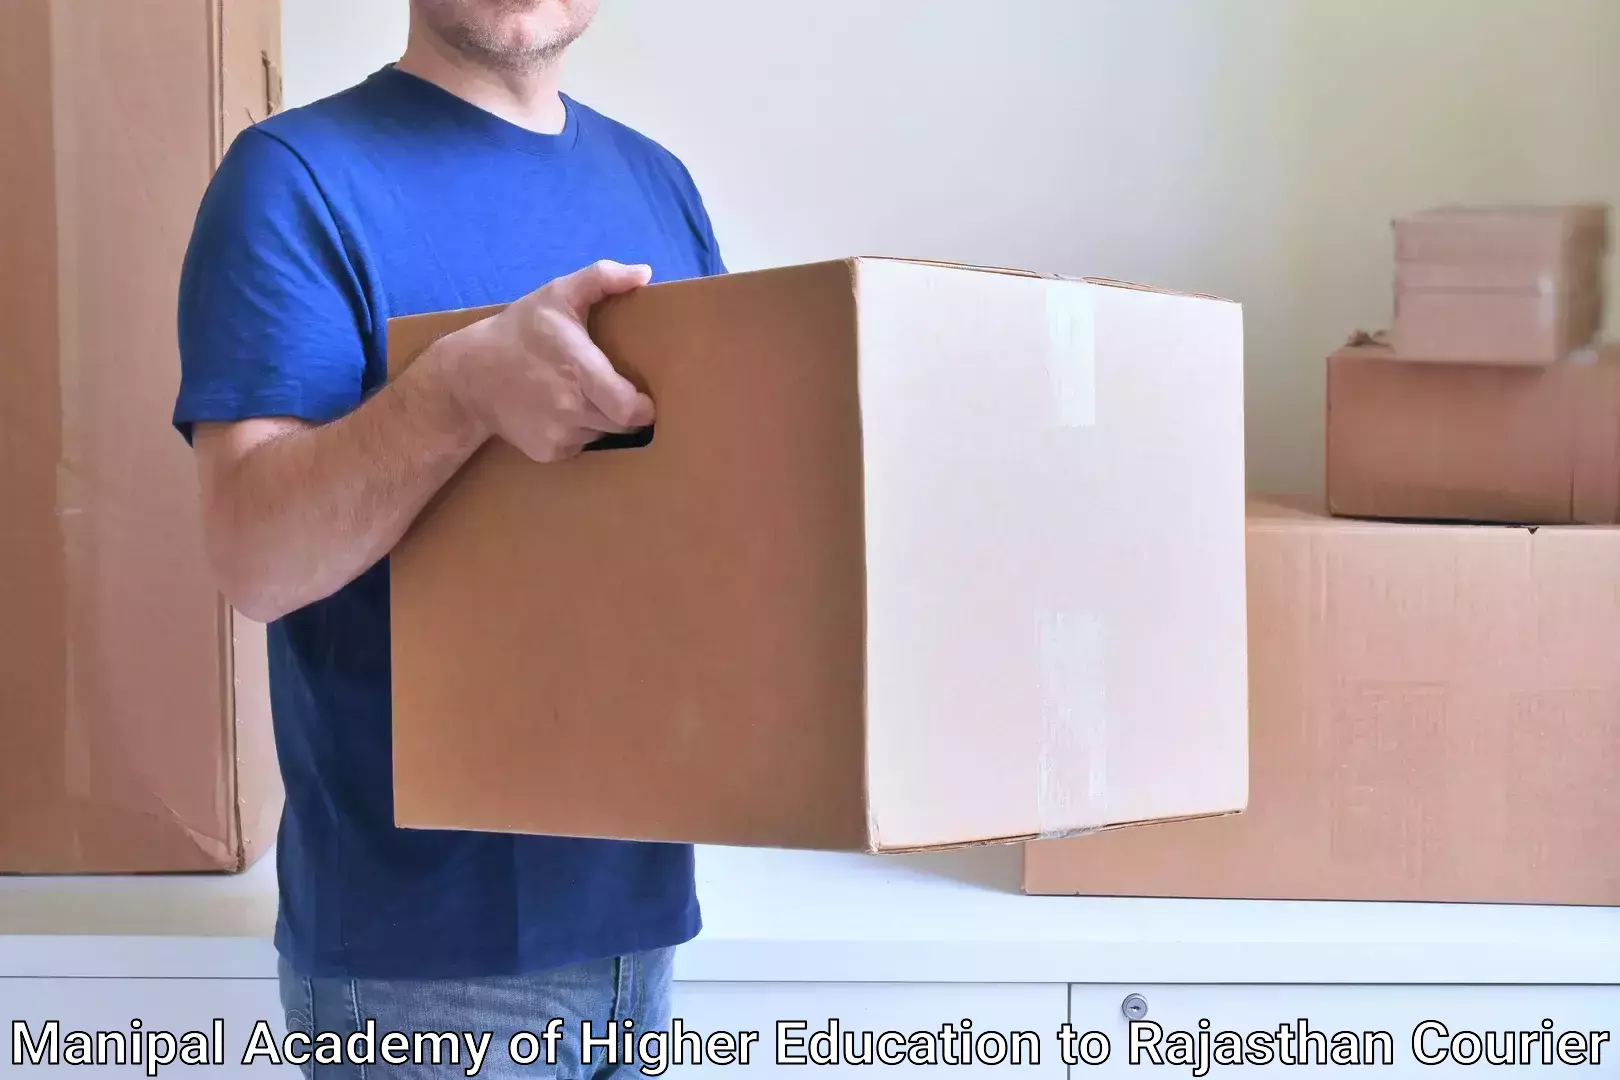 Professional courier handling Manipal Academy of Higher Education to Rajasthan